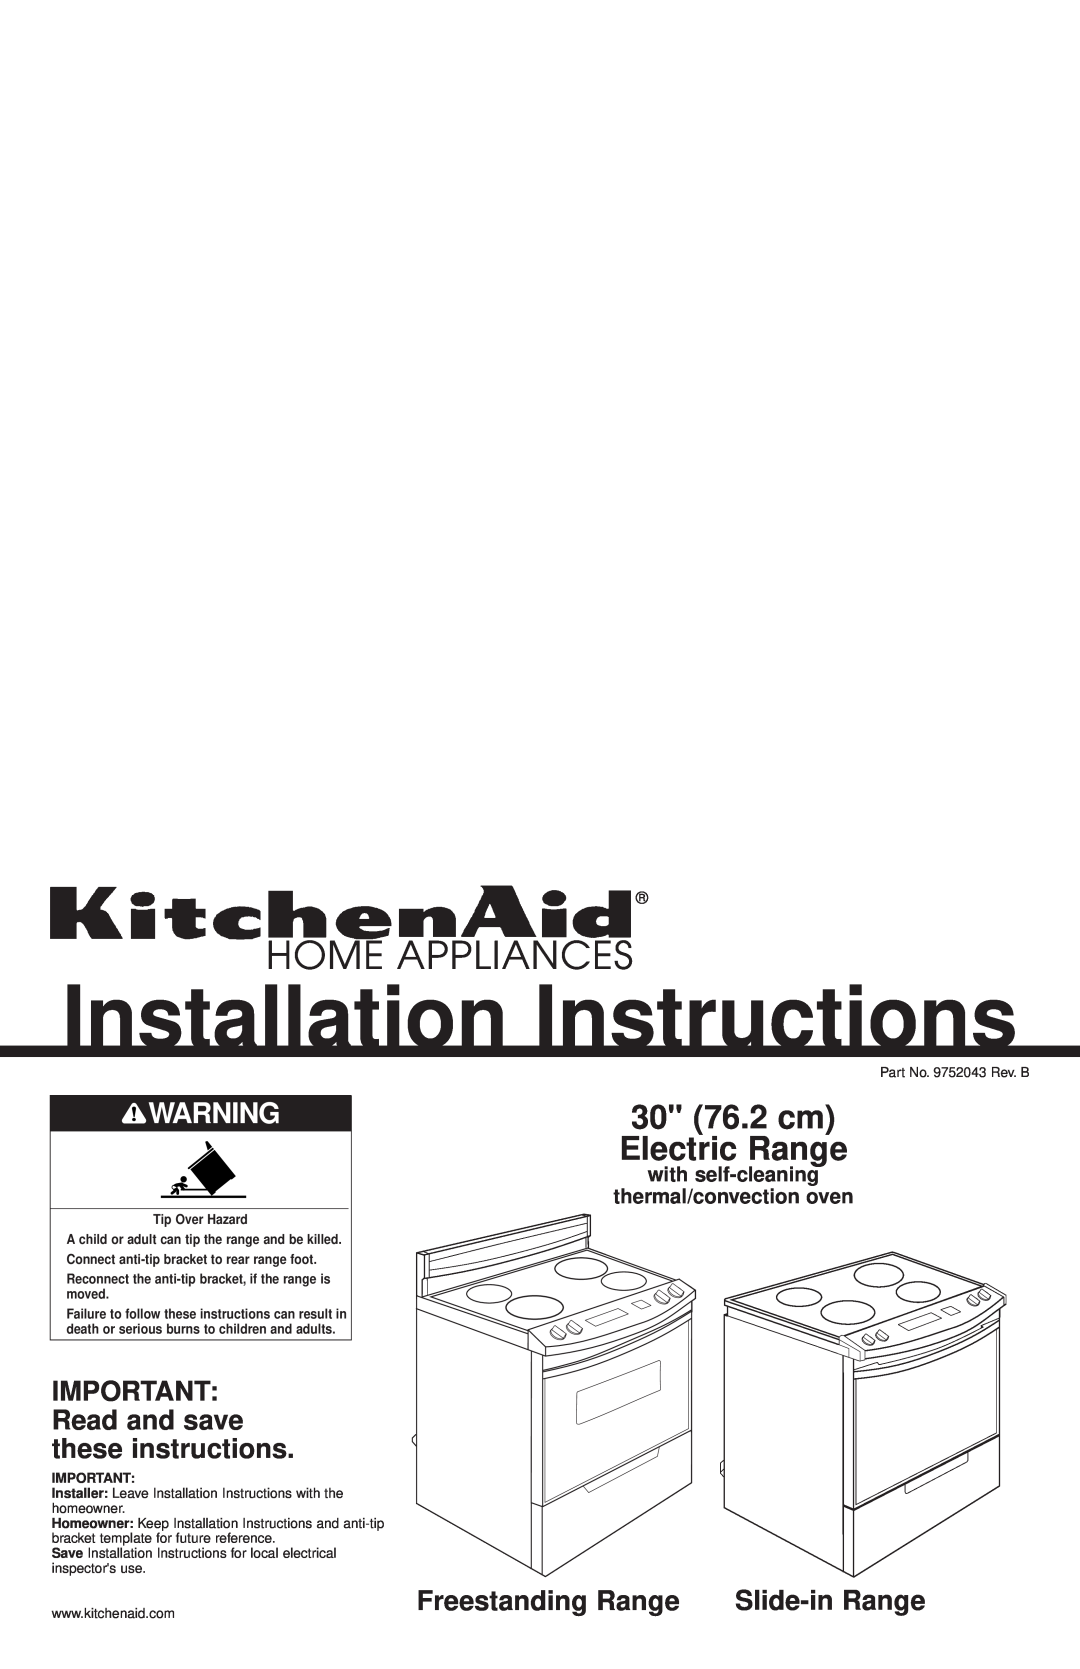 KitchenAid 9752043 installation instructions 30 76.2 cm Electric Range, with self-cleaning thermal/convection oven 